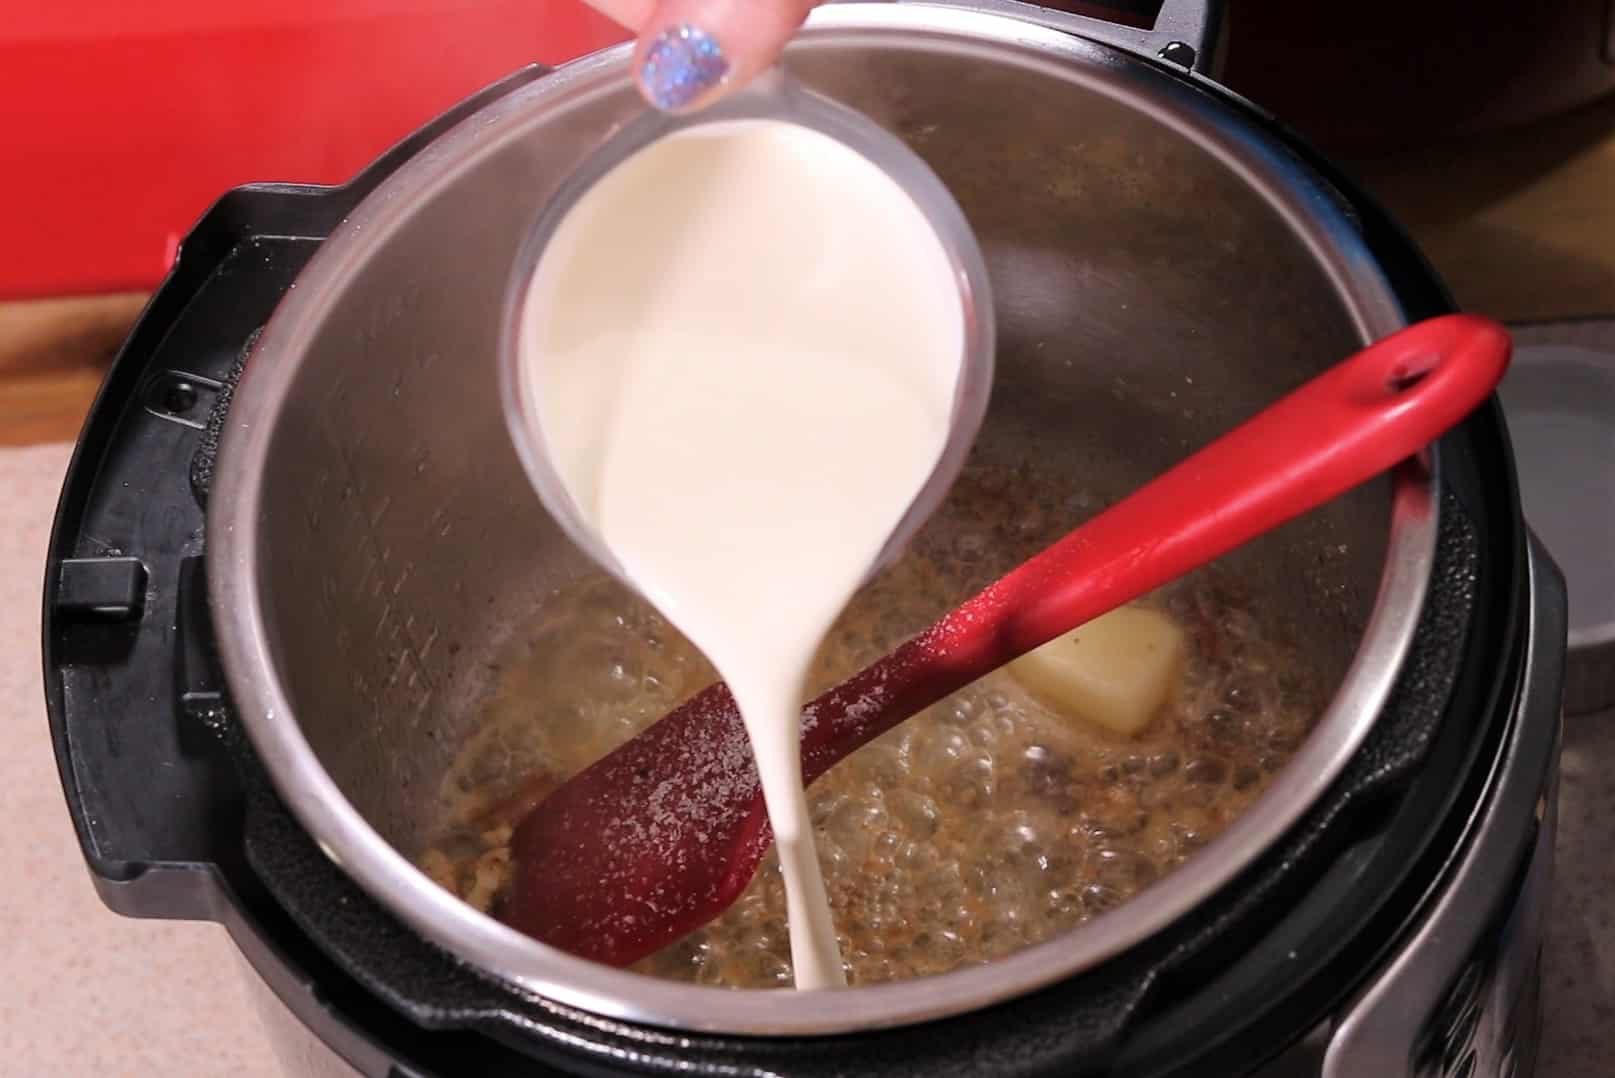 Heavy Cream Mixes with the Butter